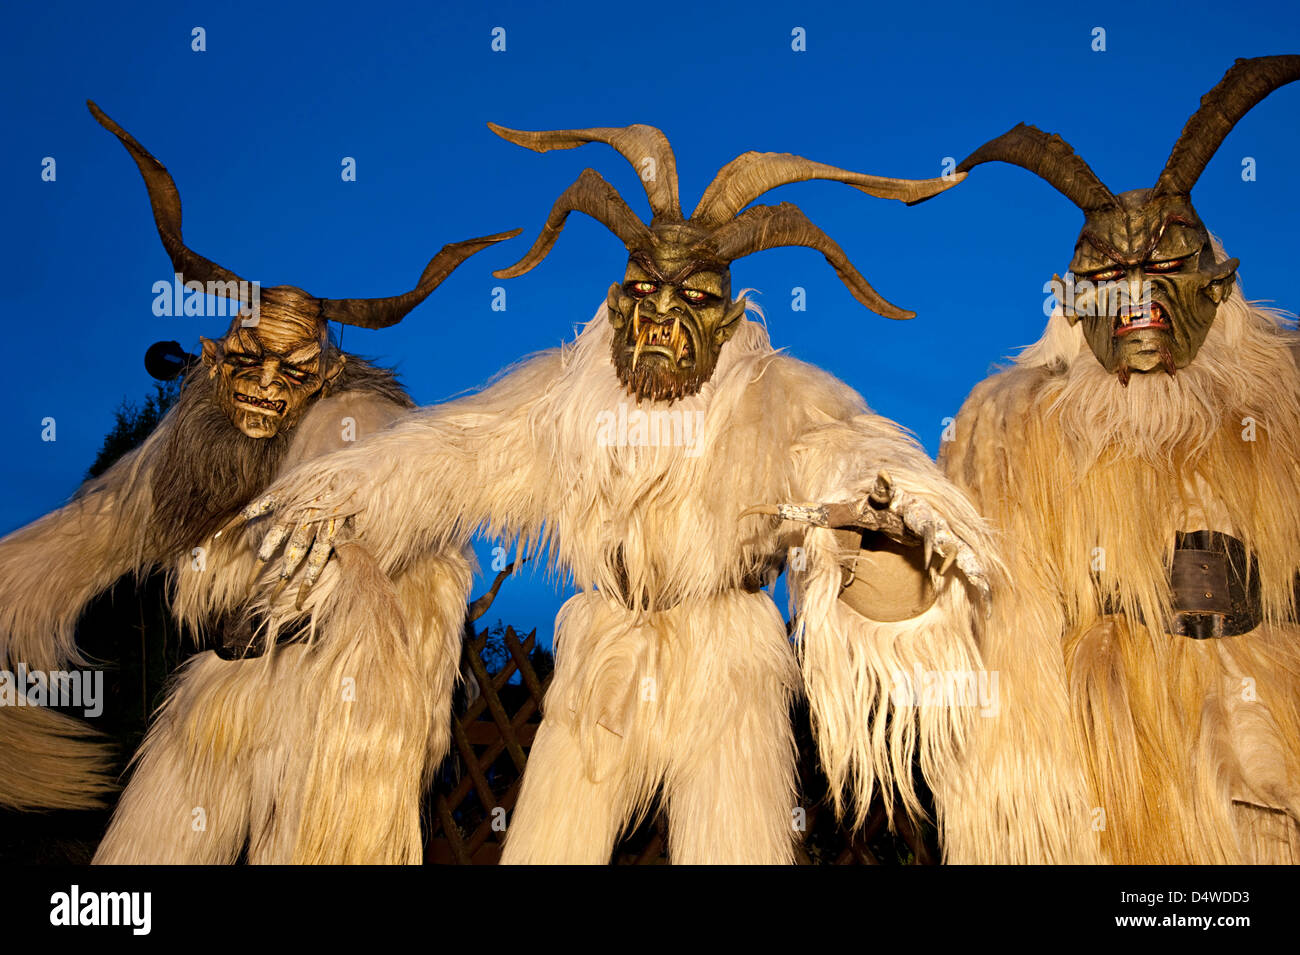 Handmade monster costumes and masks of the mythical creatures Klausen, Krampusse and Perchten are worn during a traditional folk celebration in the Allgaeu region in Boerwang, Germany, 20 November 2010. The alpine tradition is meant recall old pre-christian christmas traditions and keep away evil spirits. Photo: Andreas Ellinger Stock Photo